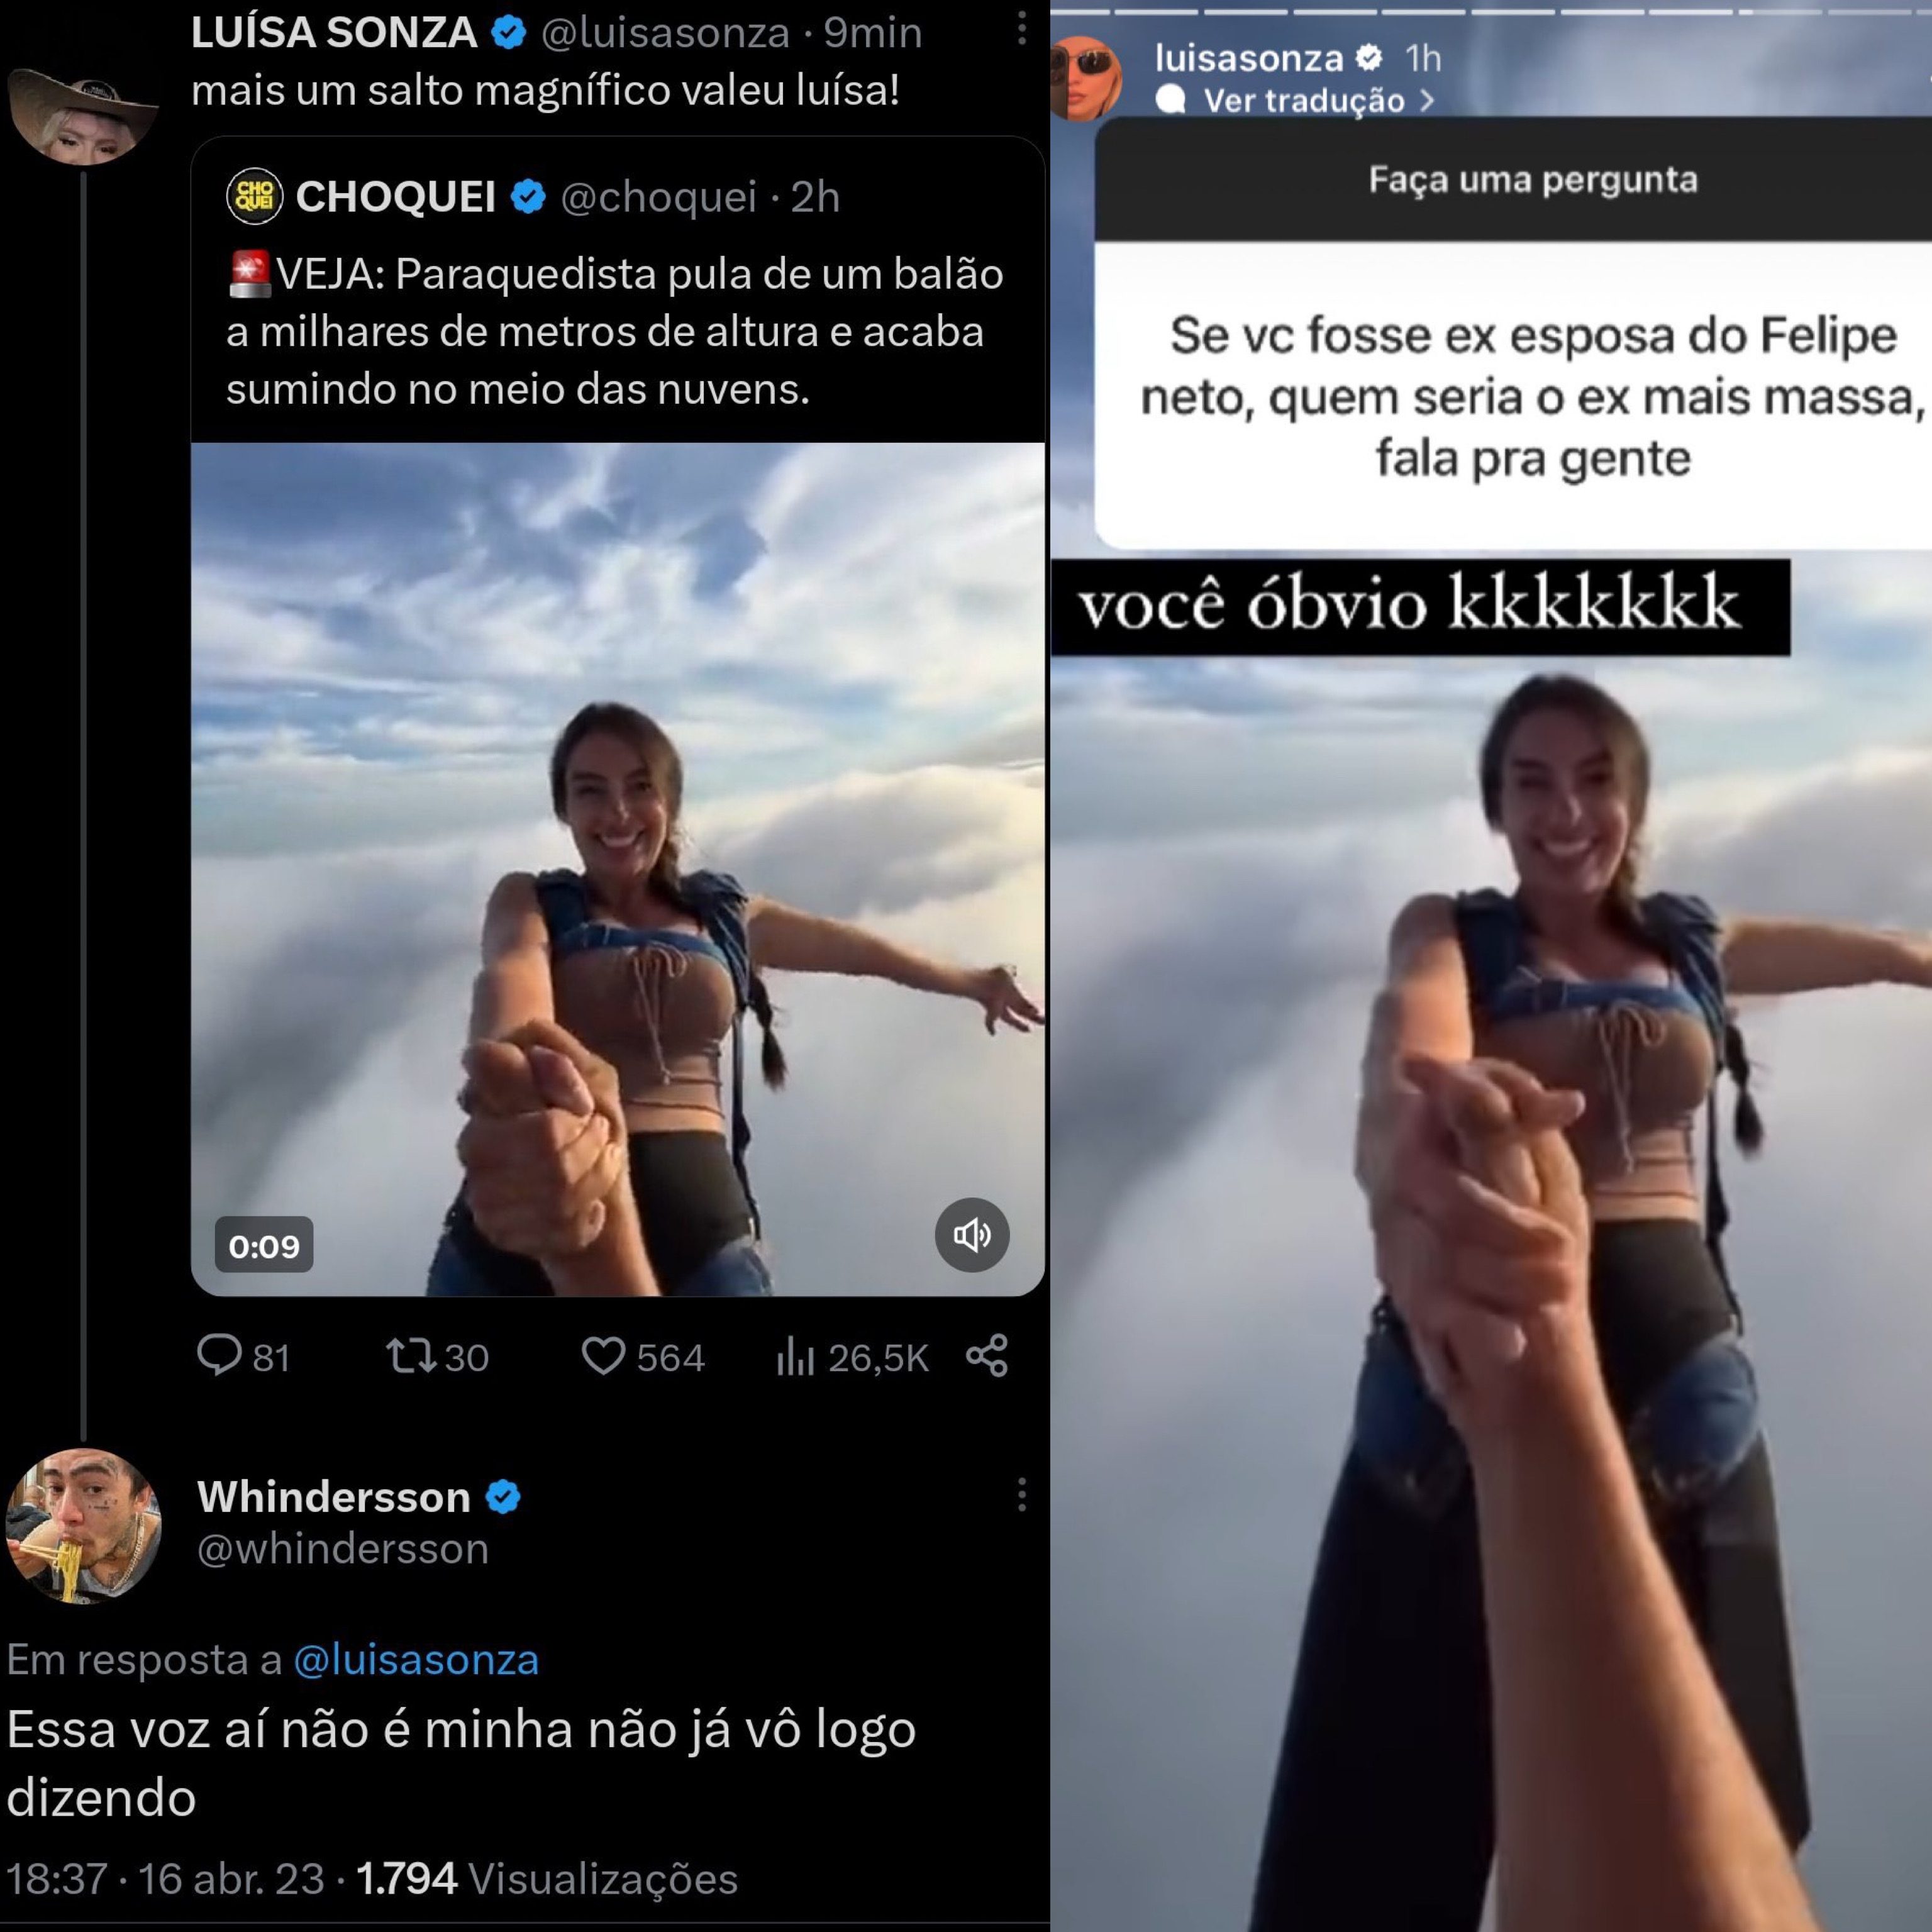 Luísa and Whindersson's most recent interaction.  (Photo: Playback/Twitter)